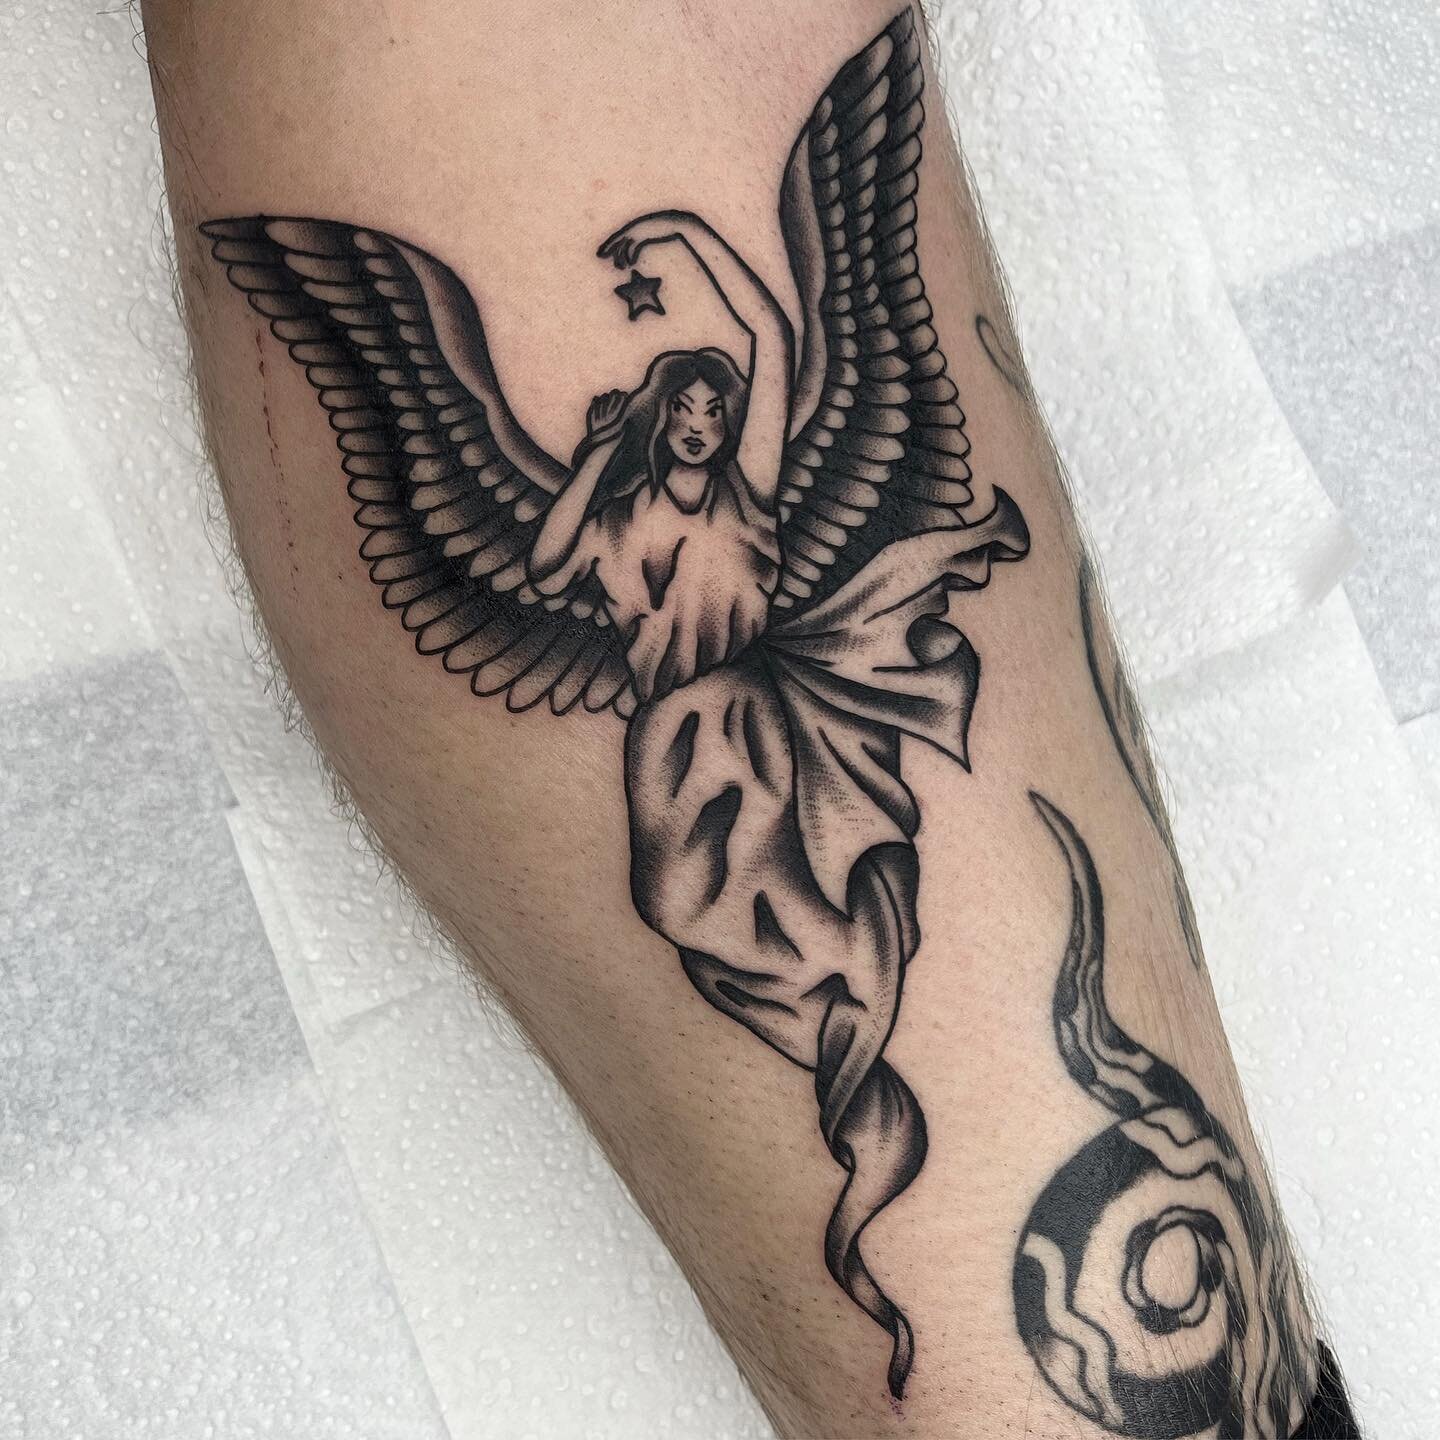 Sutherland Macdonald angel for Jacob, thanks for grabbing this one! 
@houseofdaggerstattoo